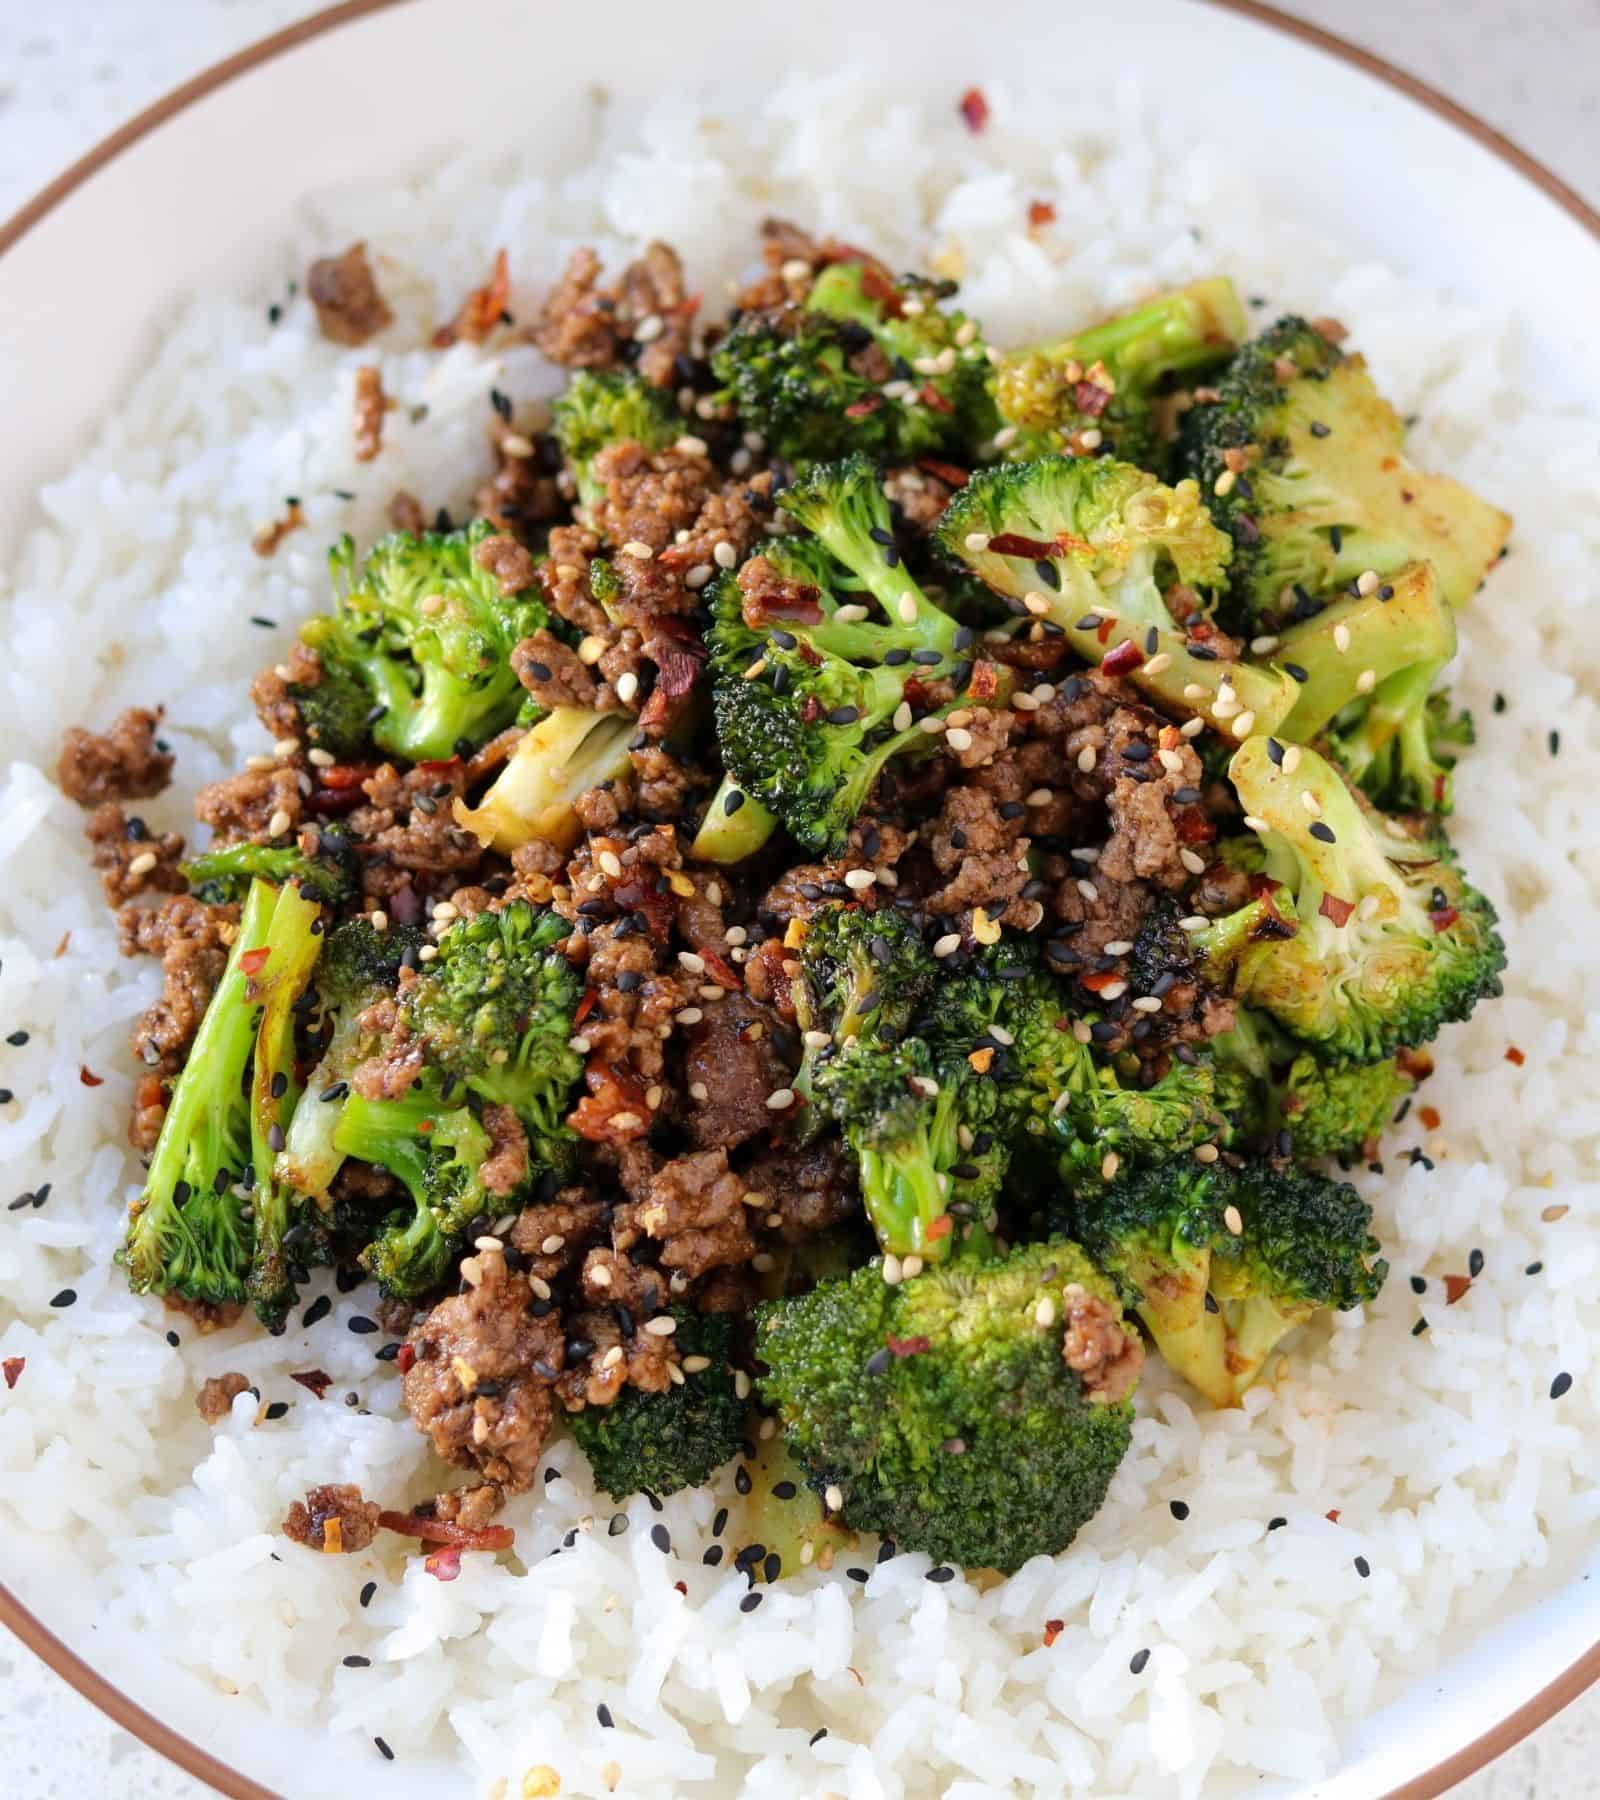 ground beef and broccoli on top of rice garnished with sesame seeds and chili flakes